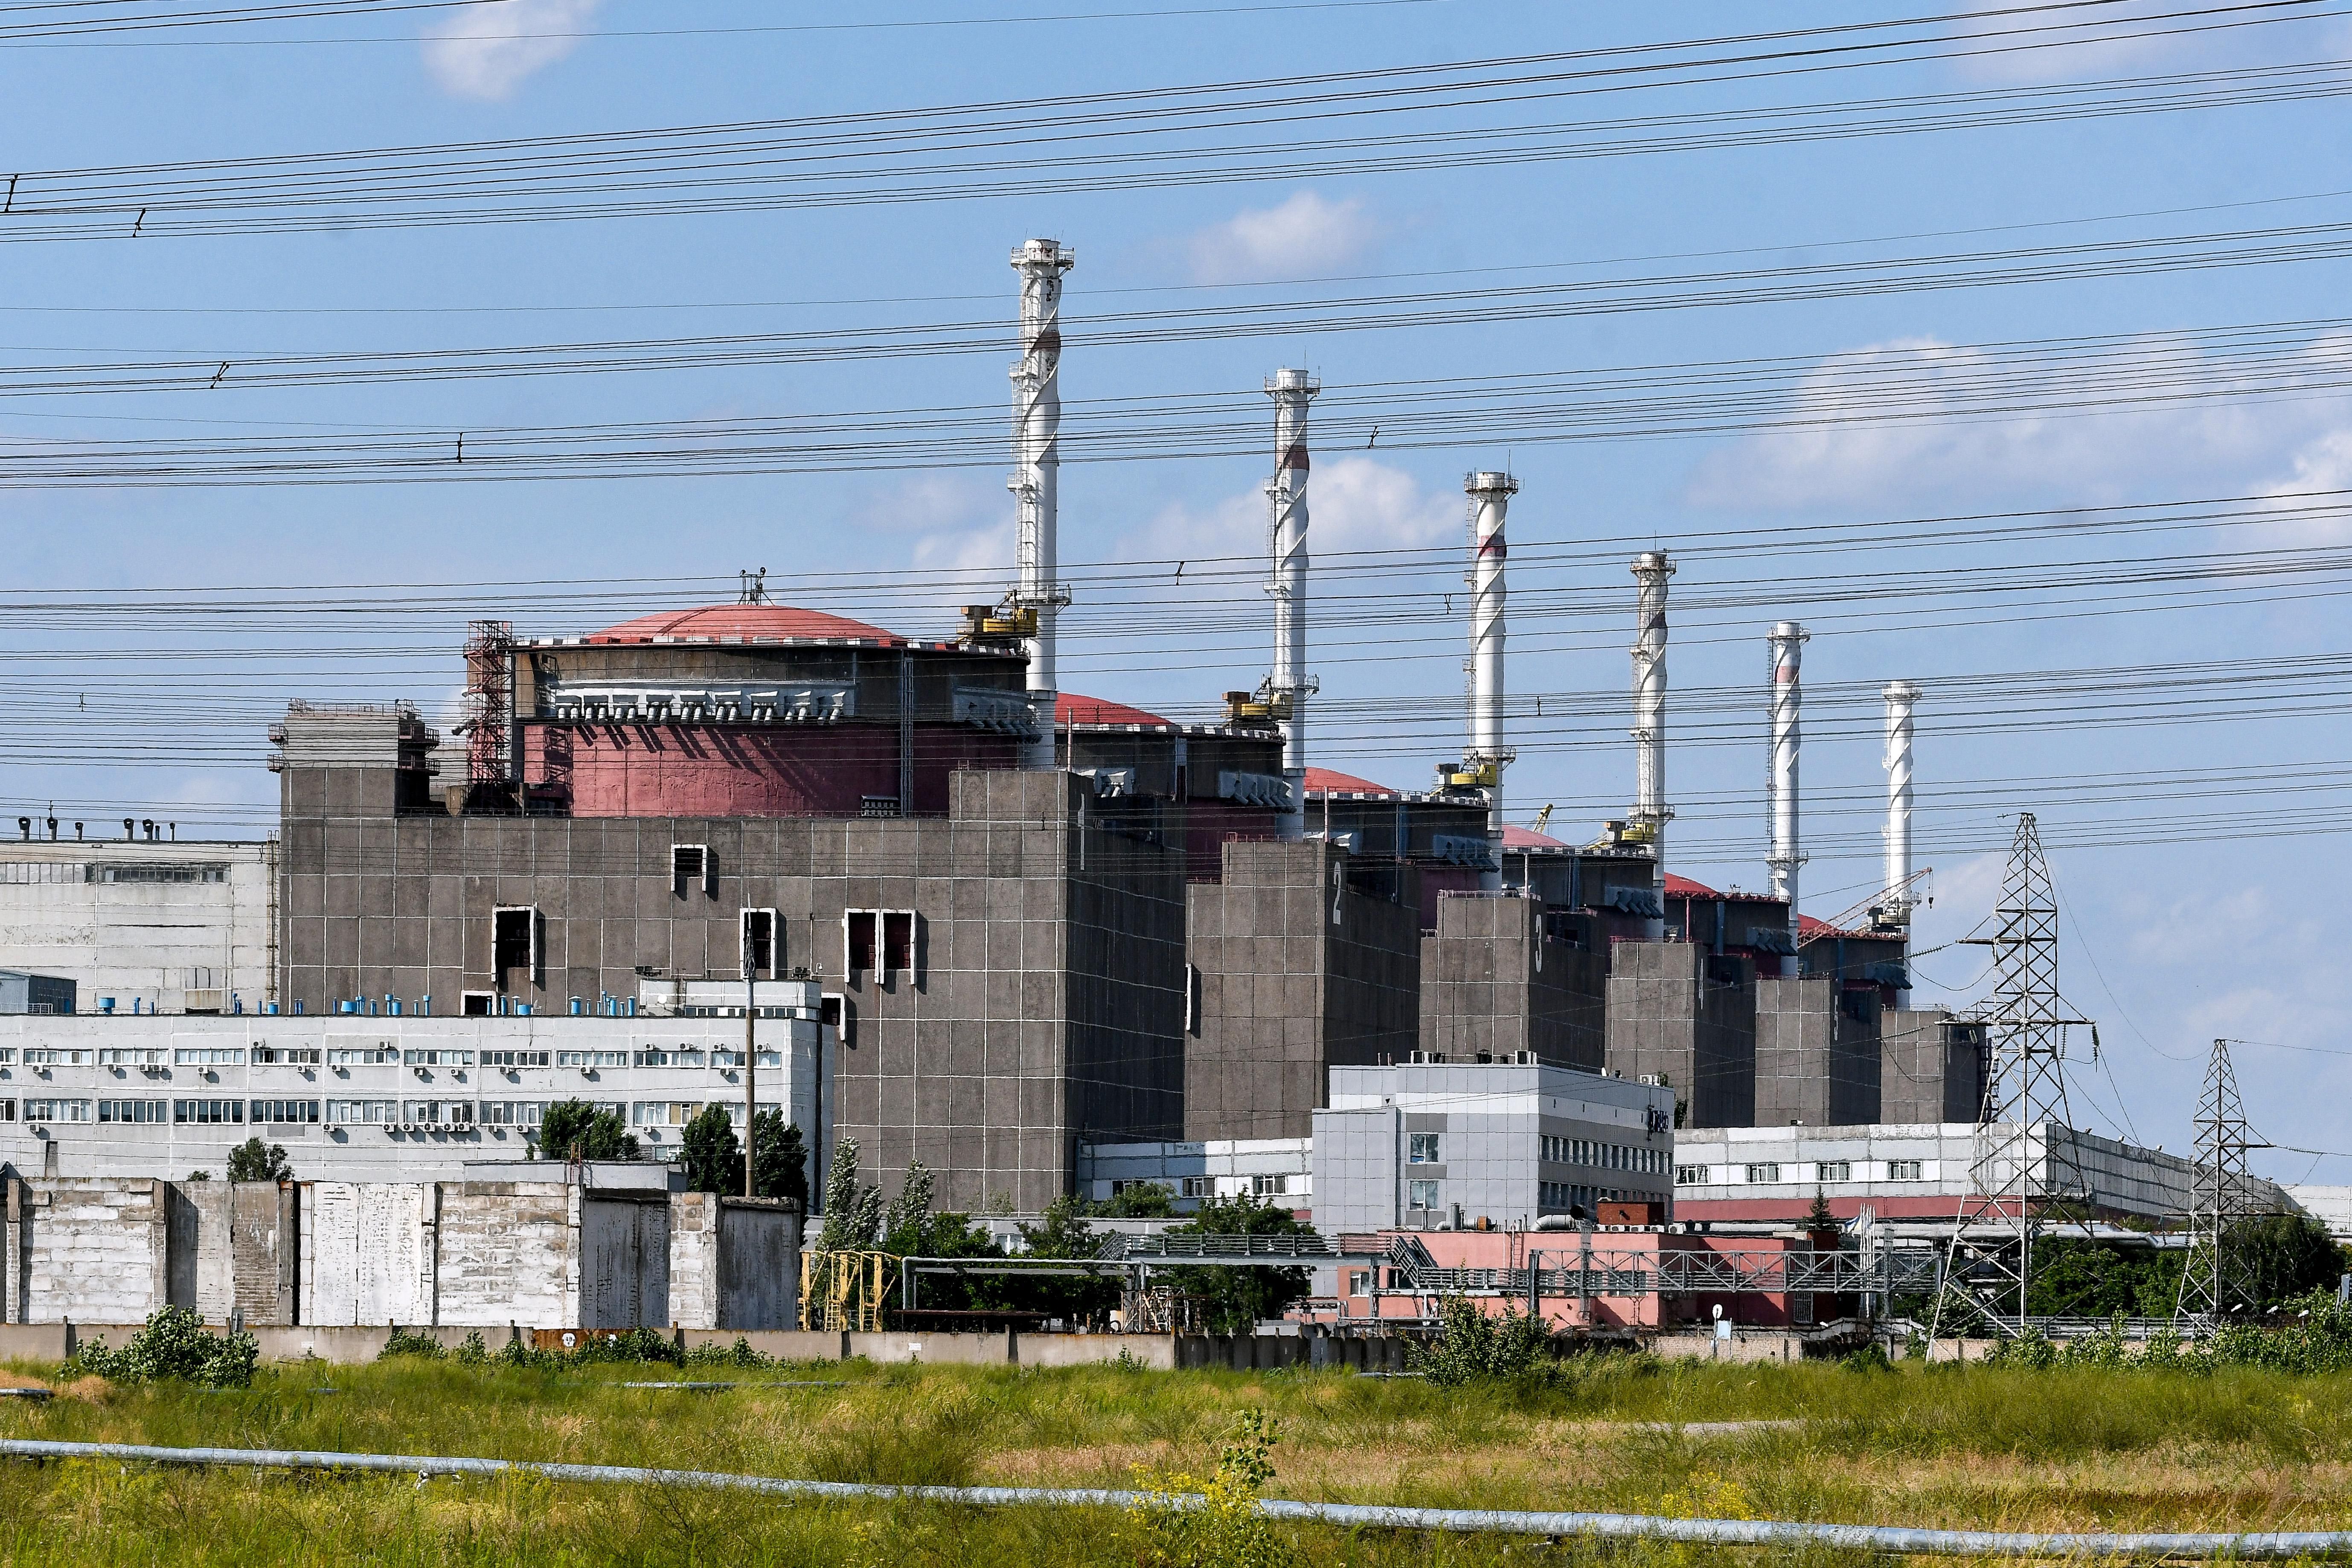 Power lines in front of 6 red reactors in concrete buildings